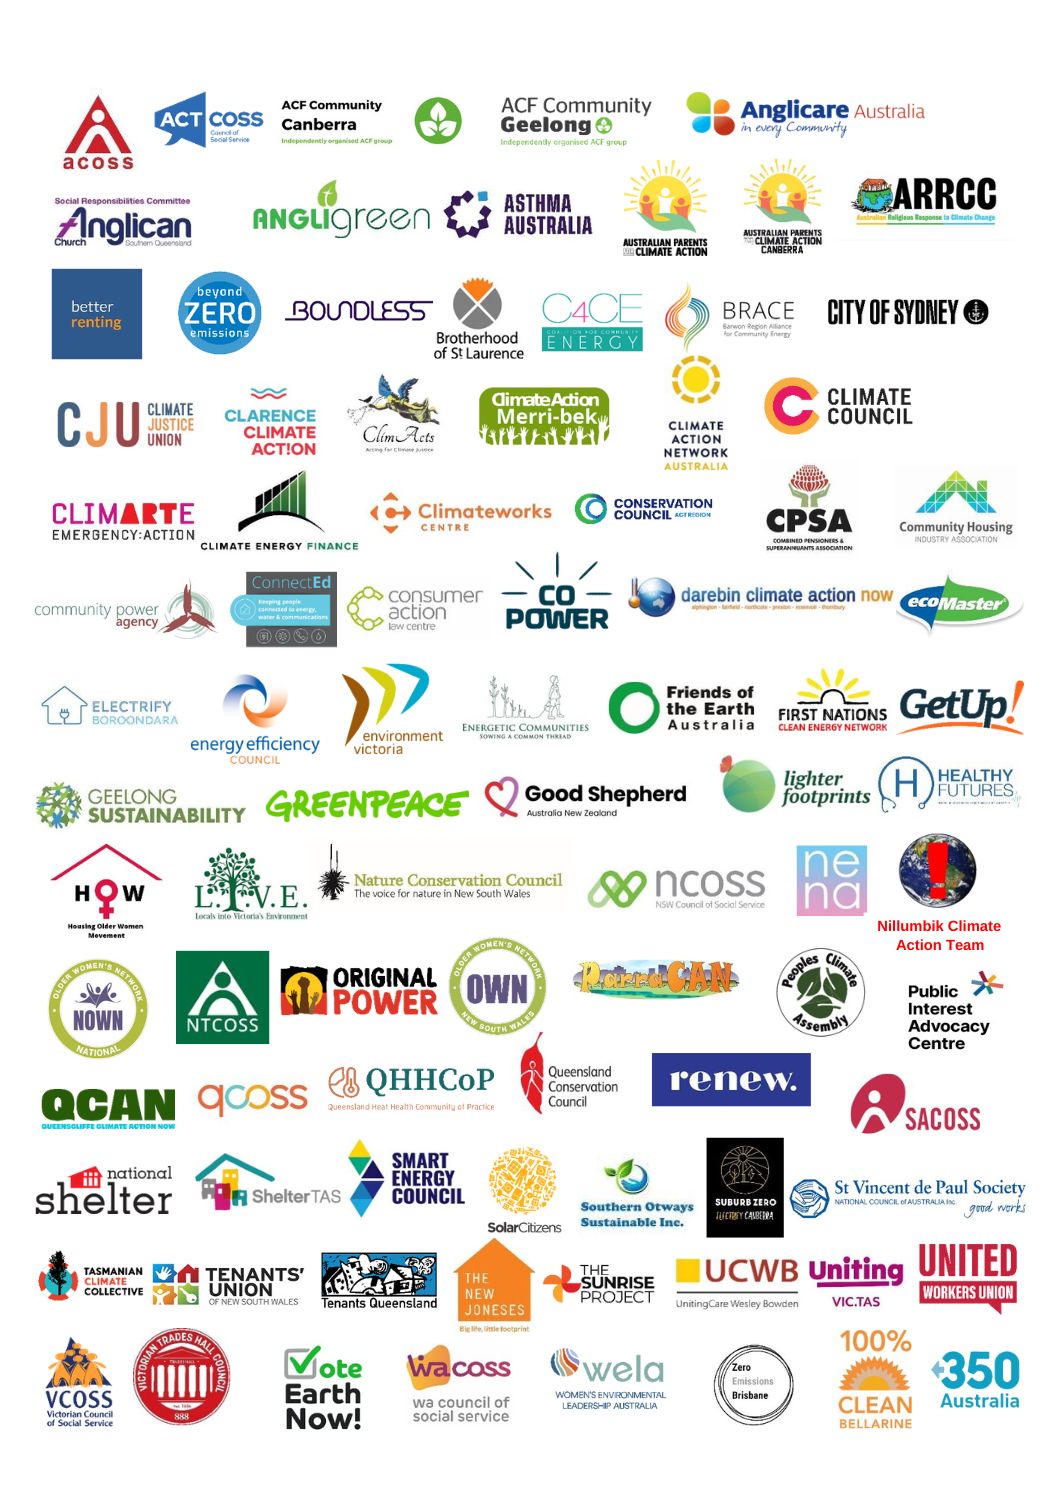 Logos from community organisations including ACOSS, Anglicare Australia, City of Sydney, Climate Council, Energy Efficiency Australia, GetUp!, Greenpeace, NCOSS, Public Interest Advocacy Centre, Renew, Tenants' Union, St Vincent De Paul Society, Uniting